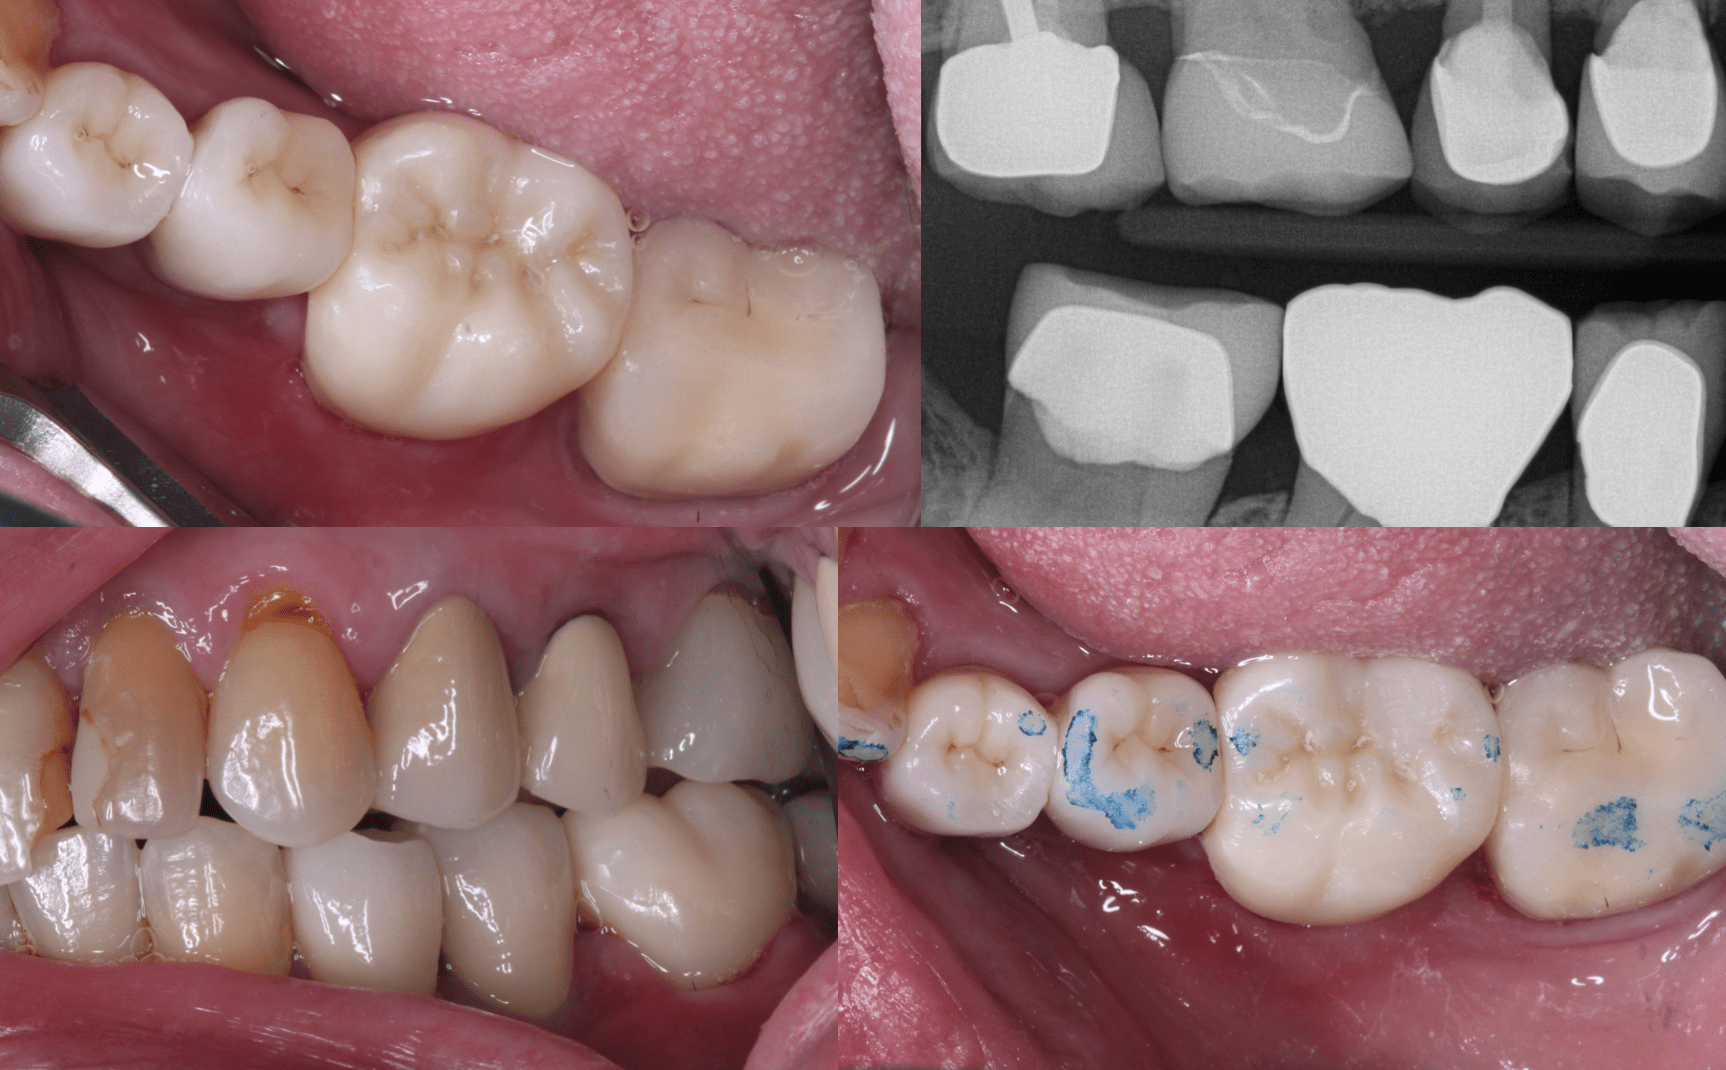 Race to the Bottom? A $3.85 Zirconia crown from a CEREC scan - Digital